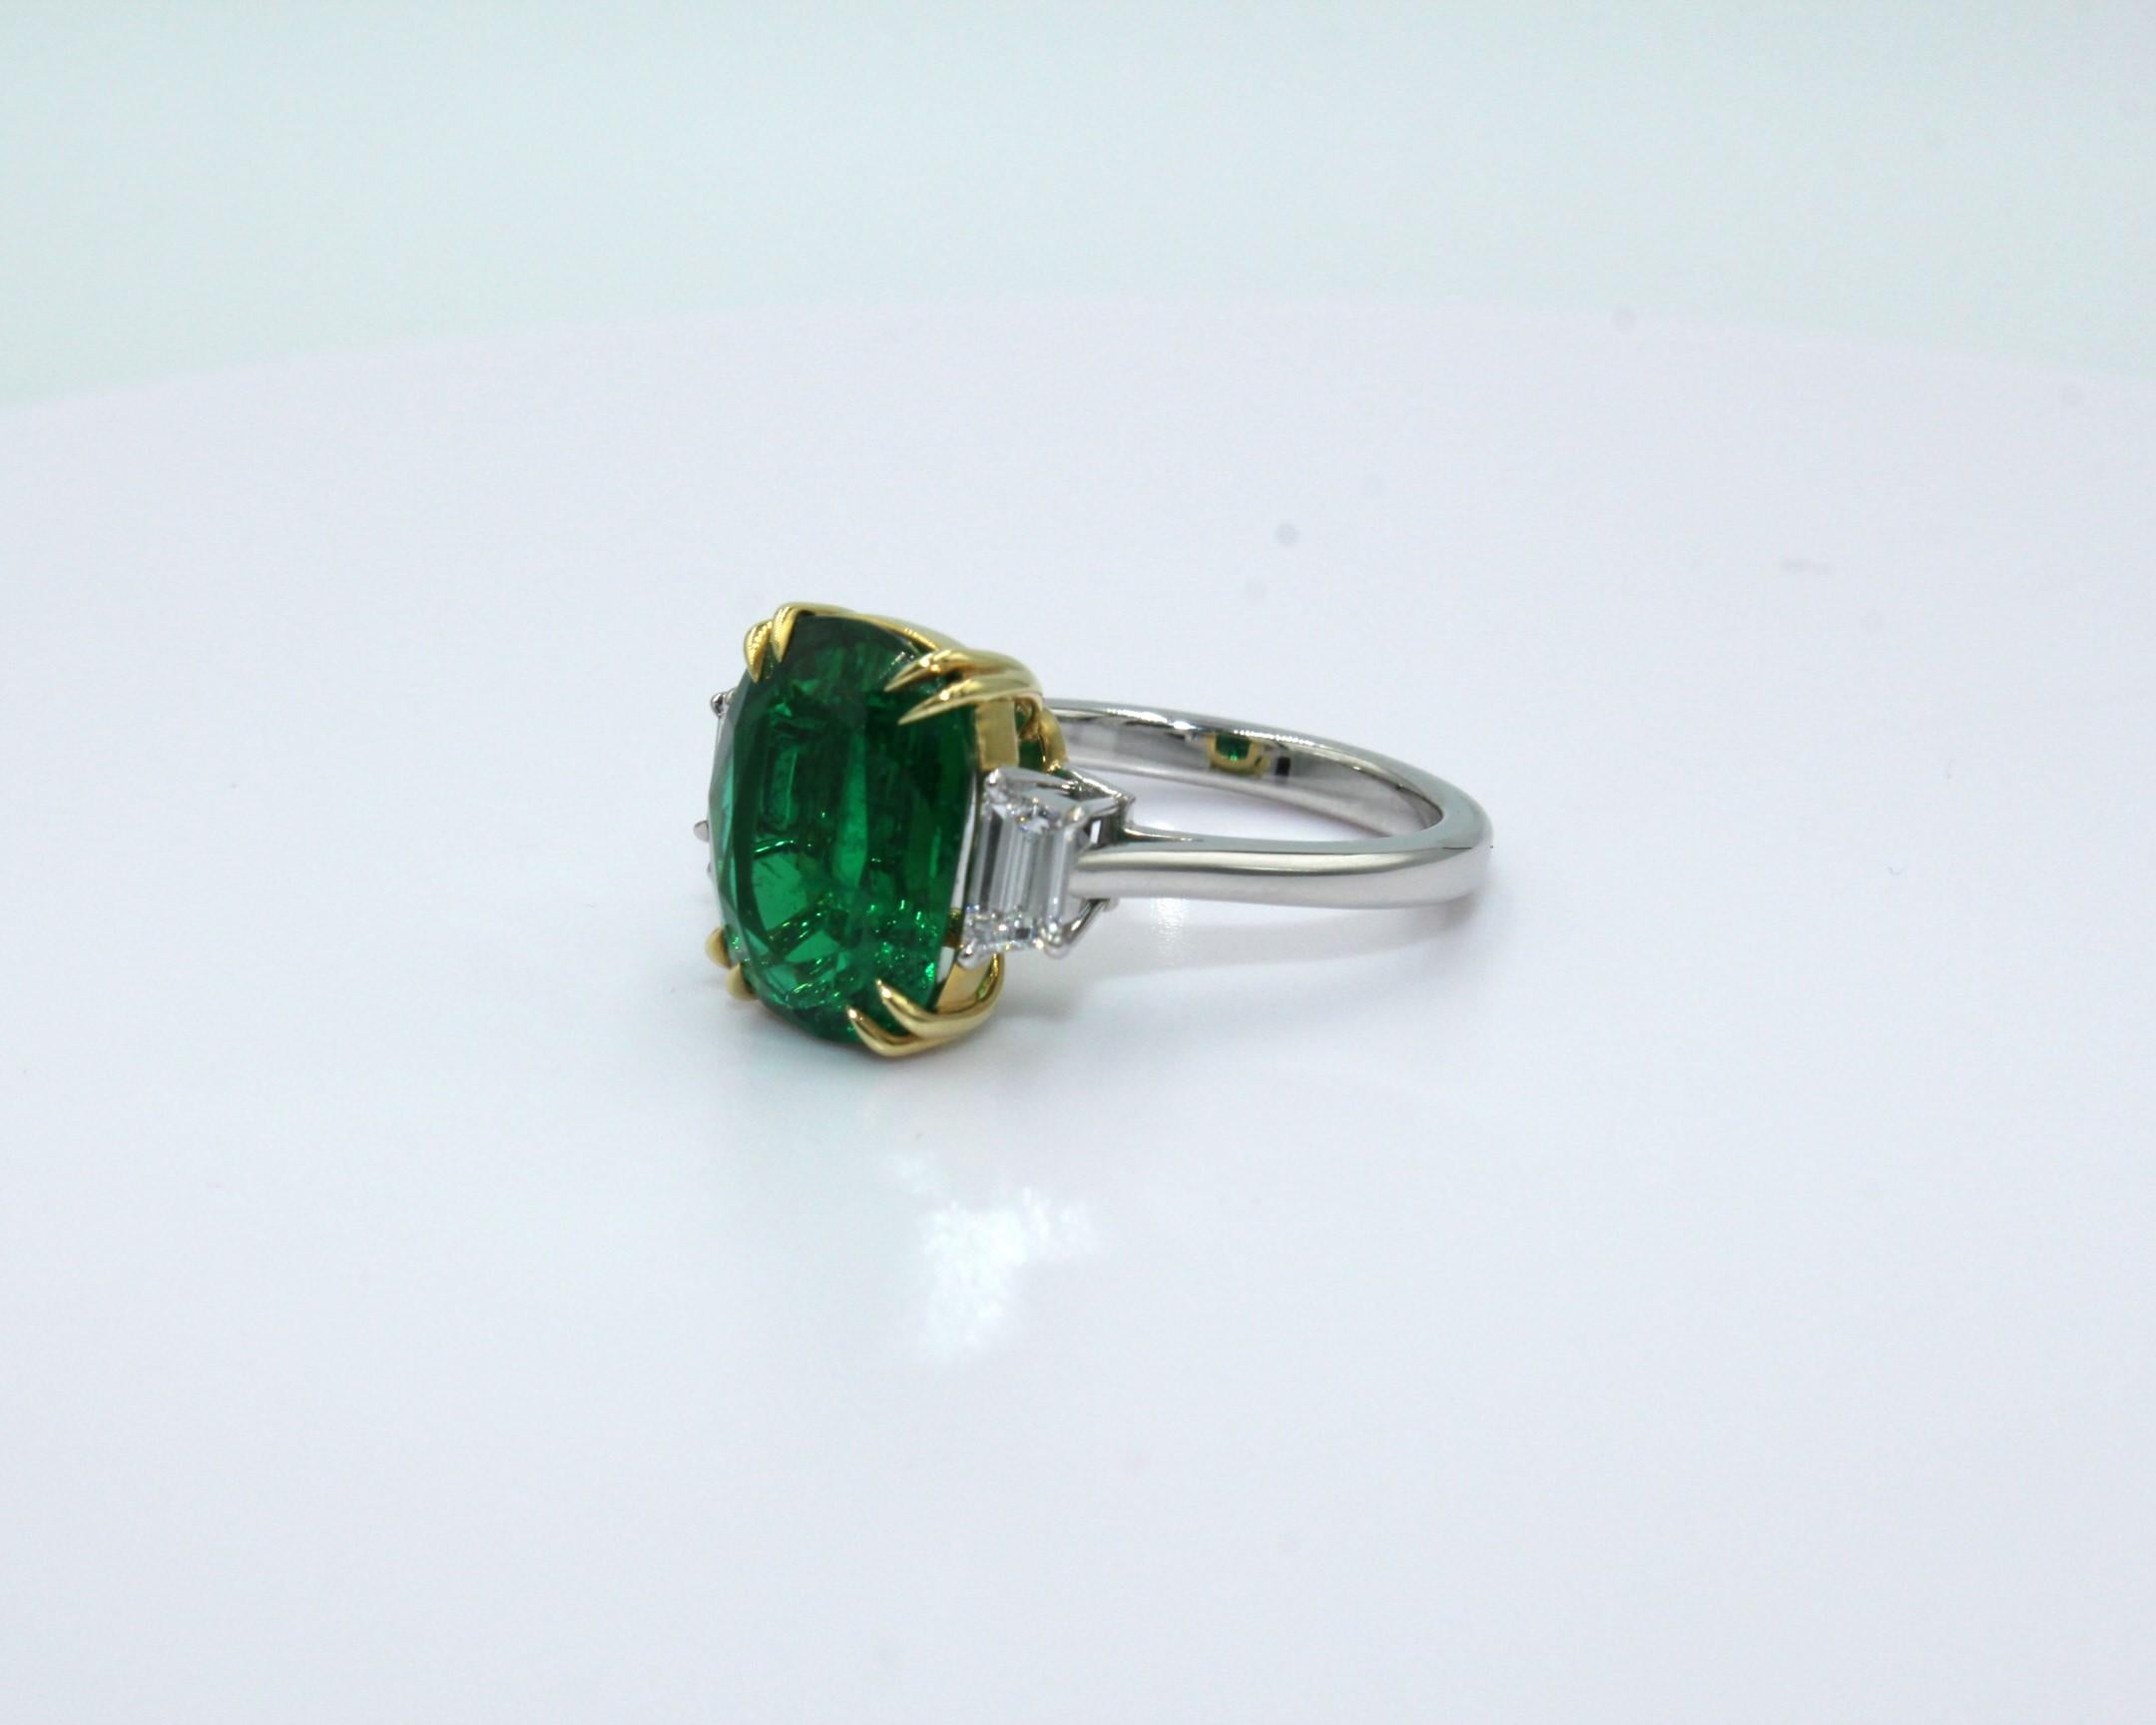 4.95 carats cushion Zambian Emerald with 2 trapezoid shaped diamonds, totaling a diamond weight of 0.39 carat. 

This stunning Emerald Diamond Ring will highlight your elegance and uniqueness. 

Item Details:
- Type: Ring
- Metal: 18K & Platinum
-